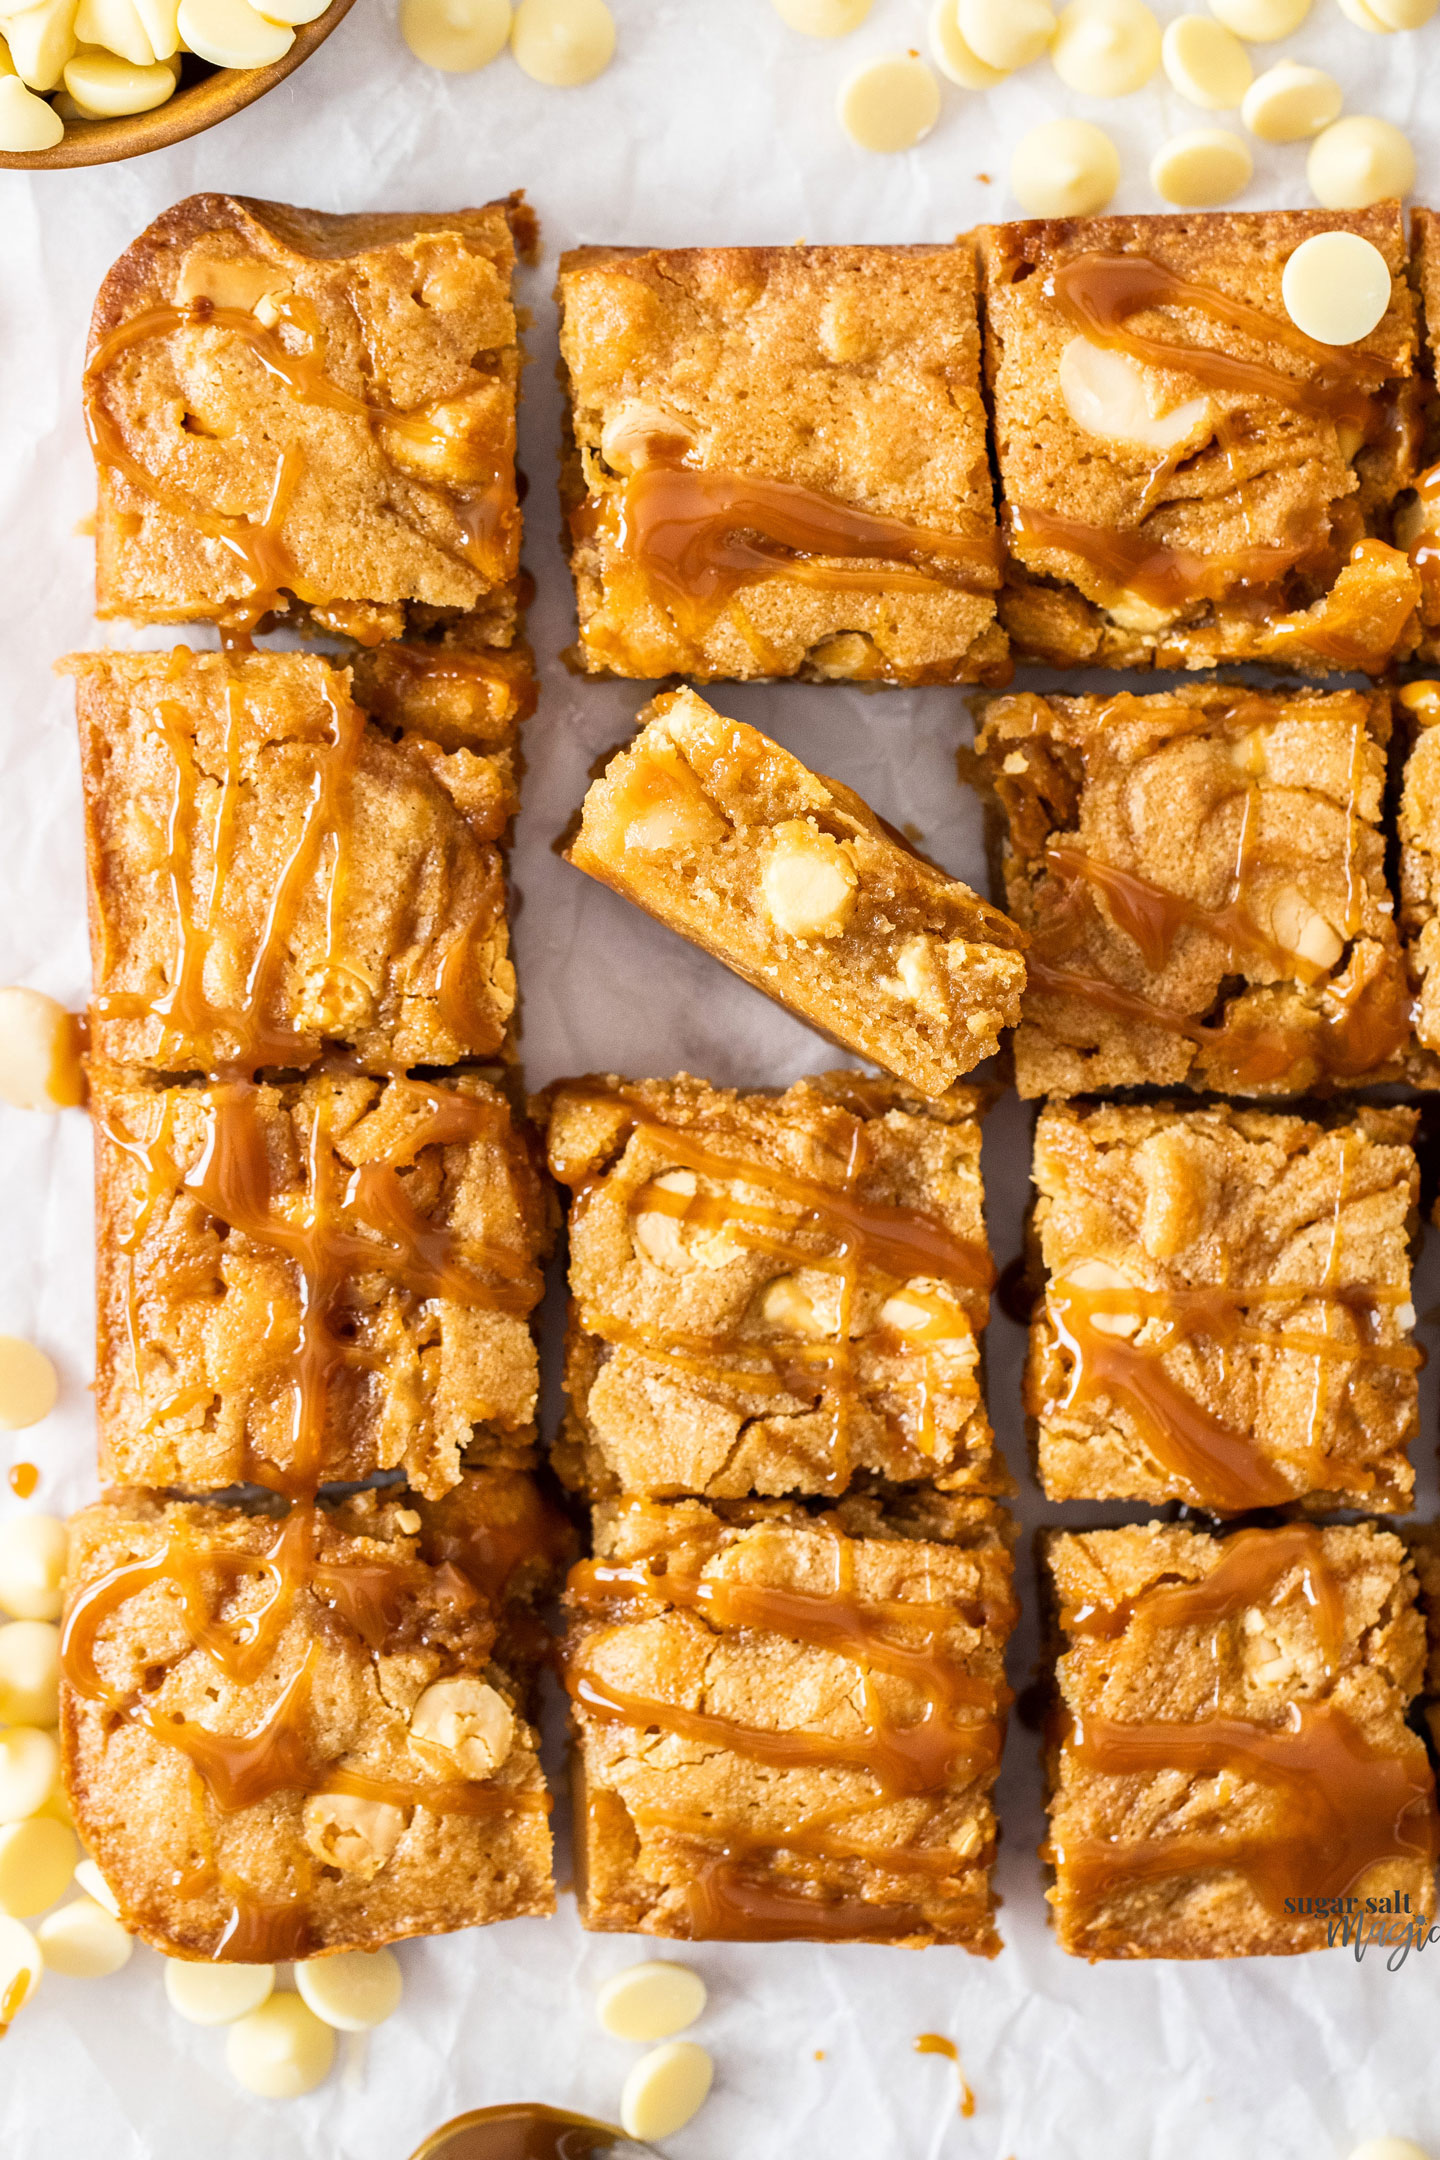 12 blondies with one standing up showing the inside texture.